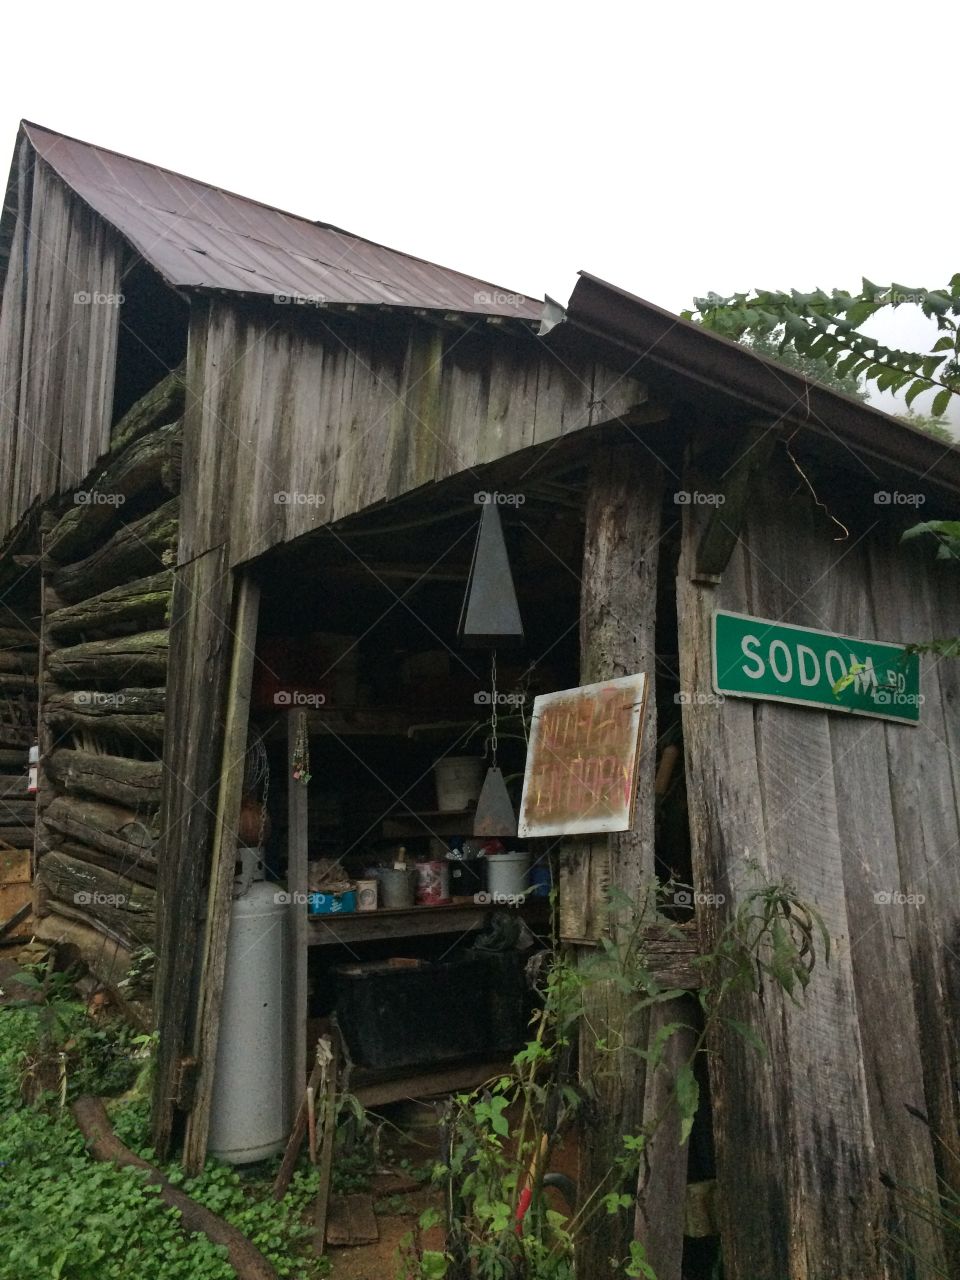 Old barn with art and sign “Sodom st”